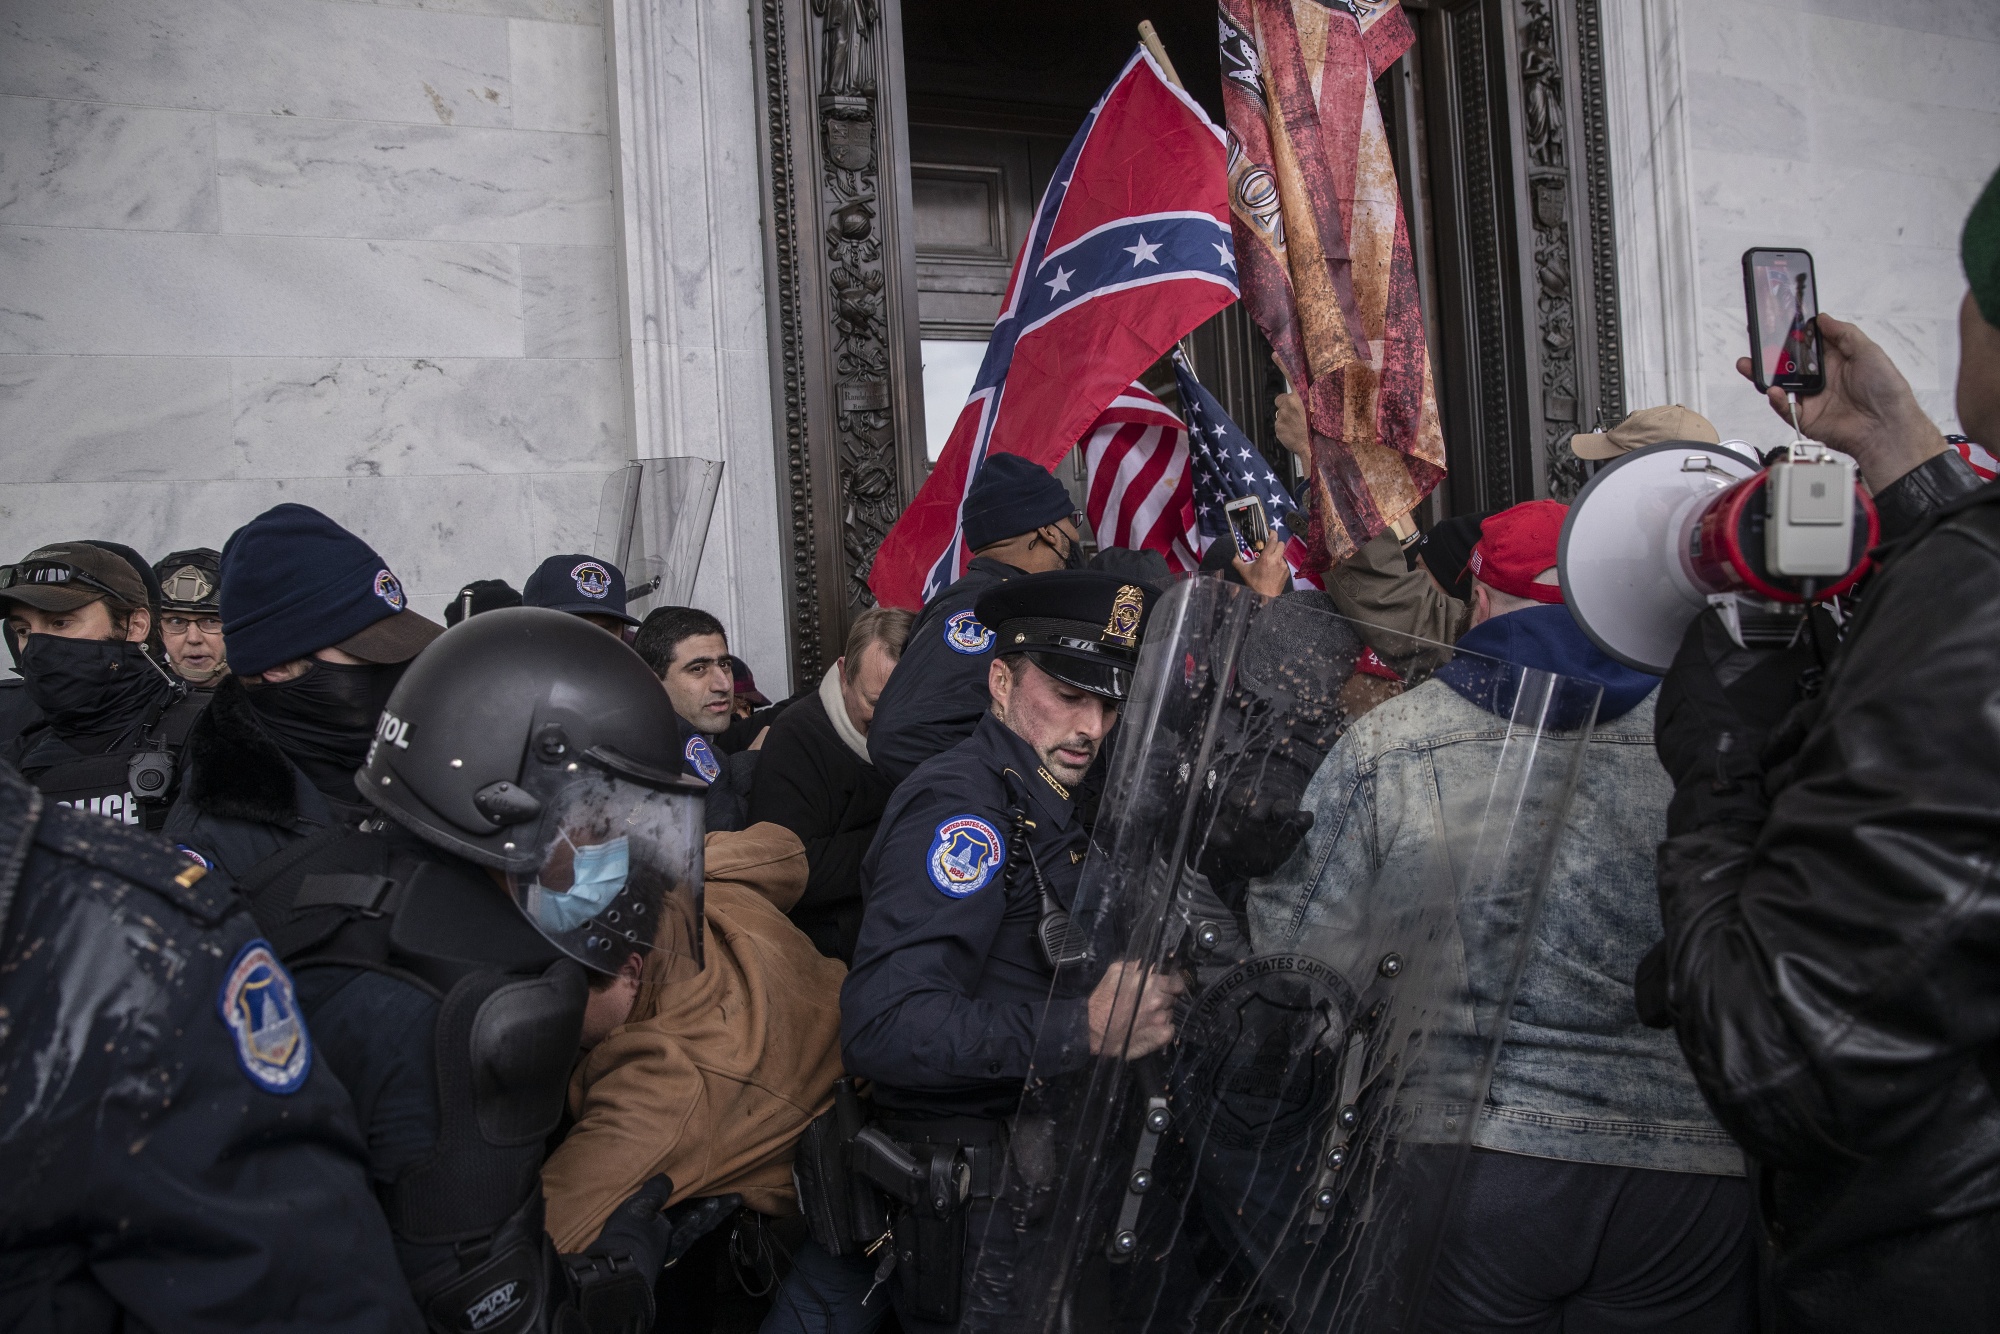 Demonstrators clash with U.S. Capitol police officers while trying to enter the Capitol building on Jan. 6.